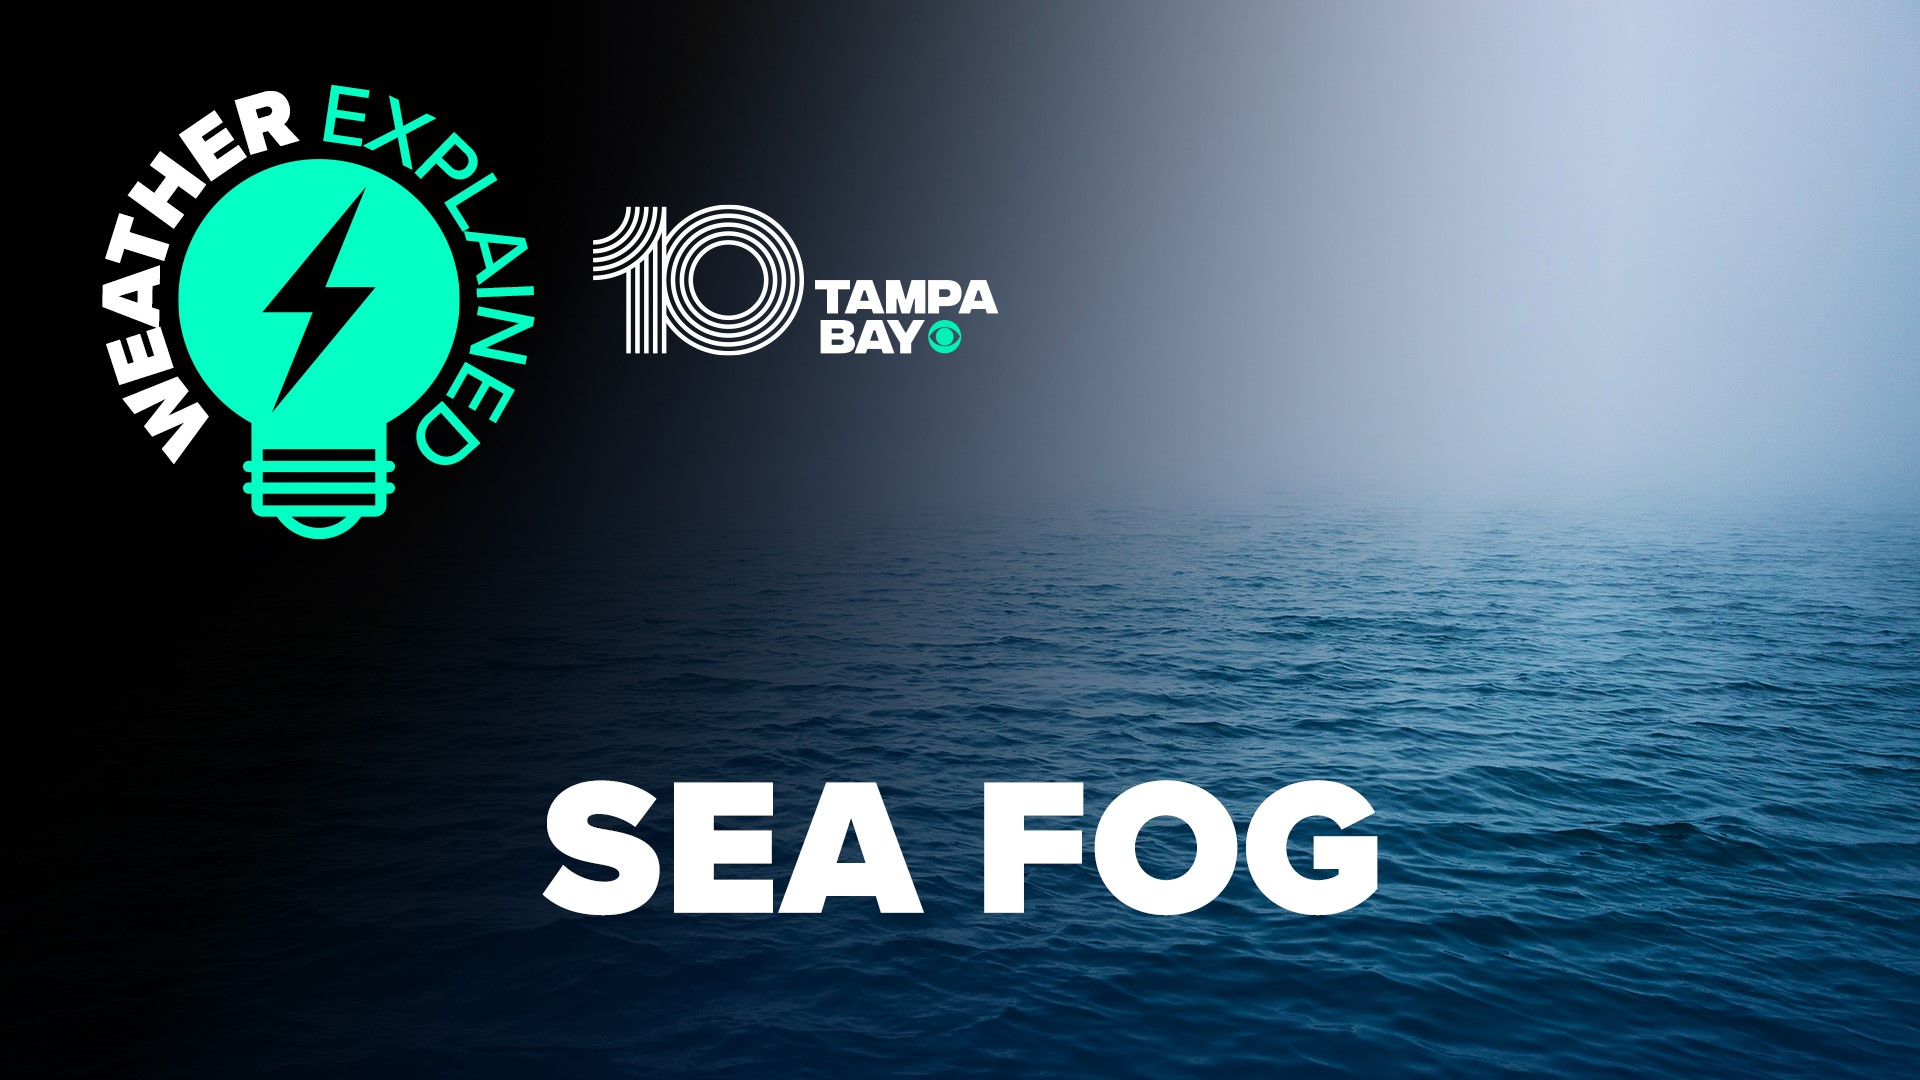 10 Tampa Bay meteorologist Grant Gilmore shows you how sea fog develops during the cooler months.